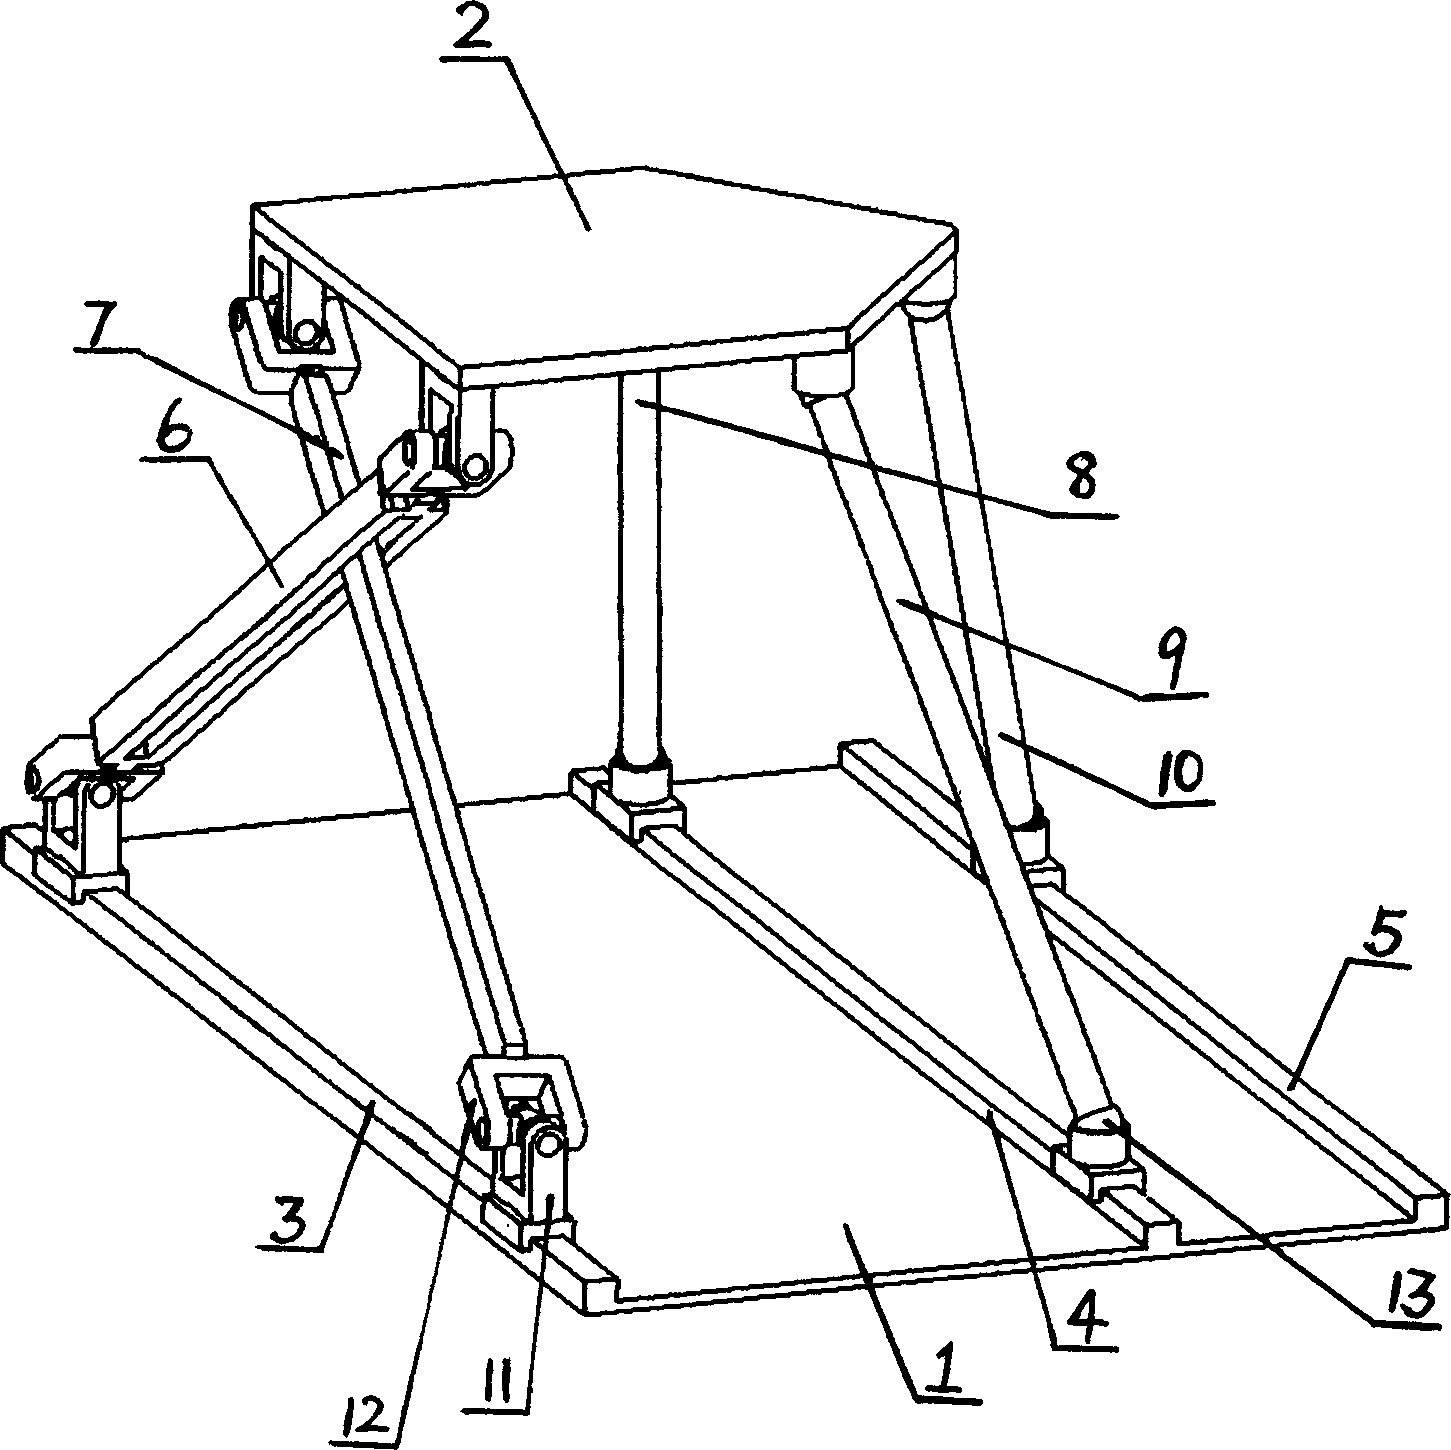 Five-freedom parallel robot mechanism with three translational dimensions and two rotational dimensions